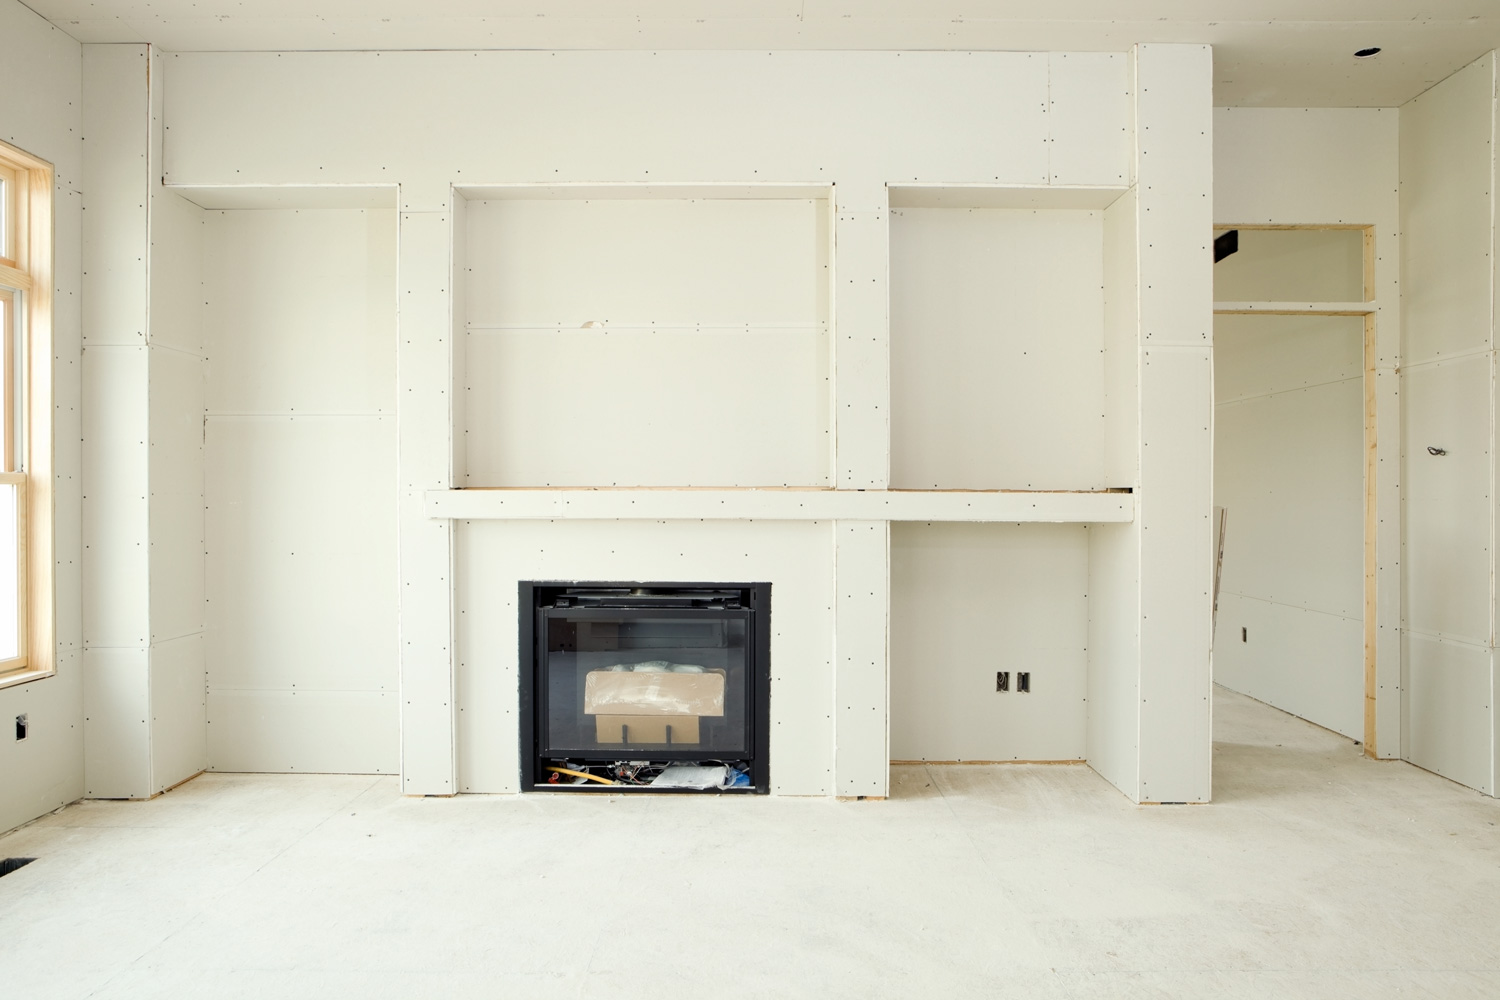 New Living Room Drywall with Fireplace and Built-in Shelves